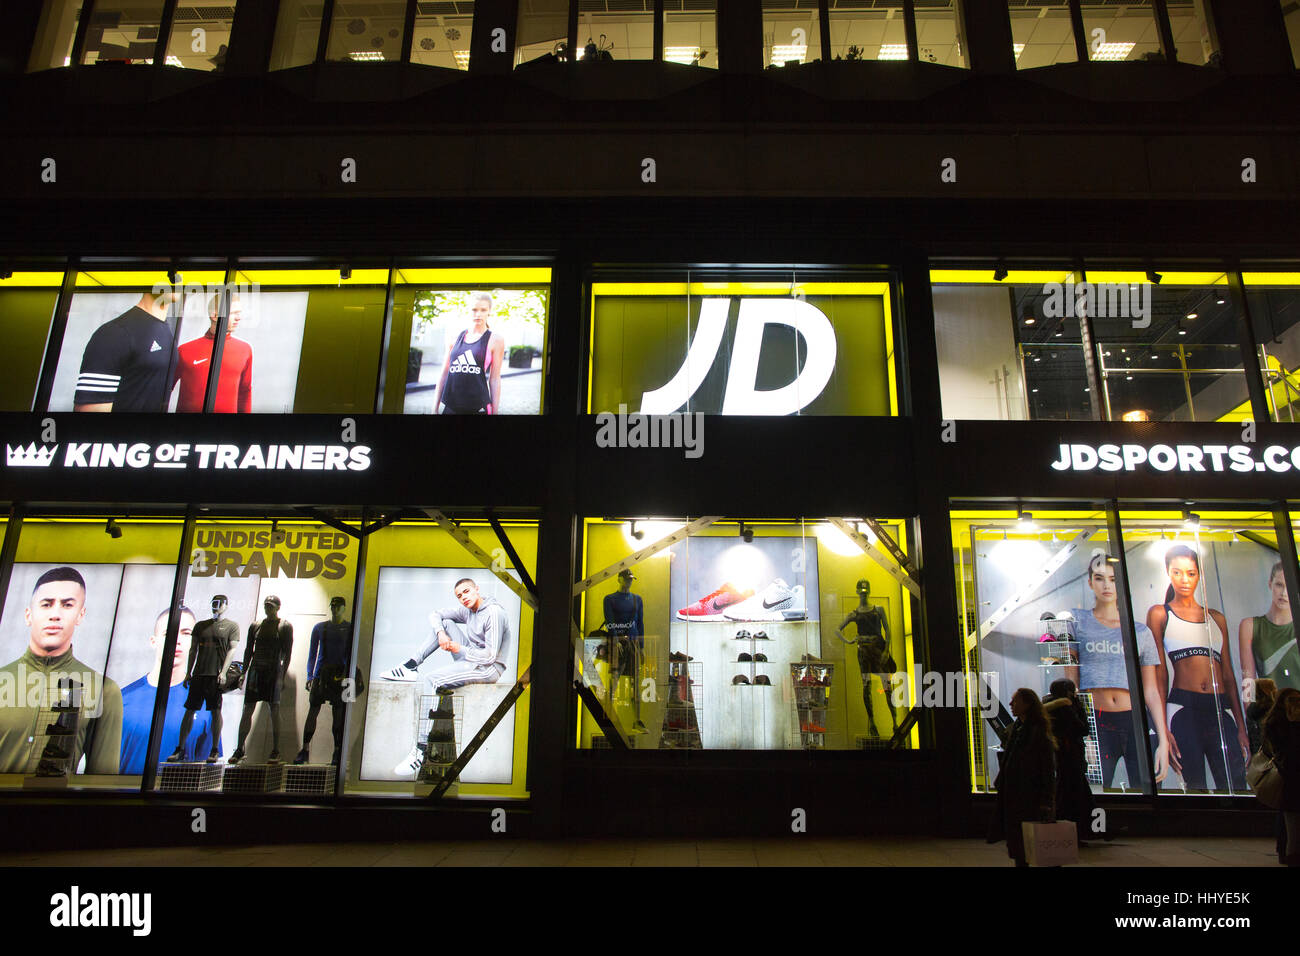 JD Sports Fashion plc, more commonly known as just JD, high street sports fashion retailers, Oxford Street, London, England, United Kingdom. Stock Photo